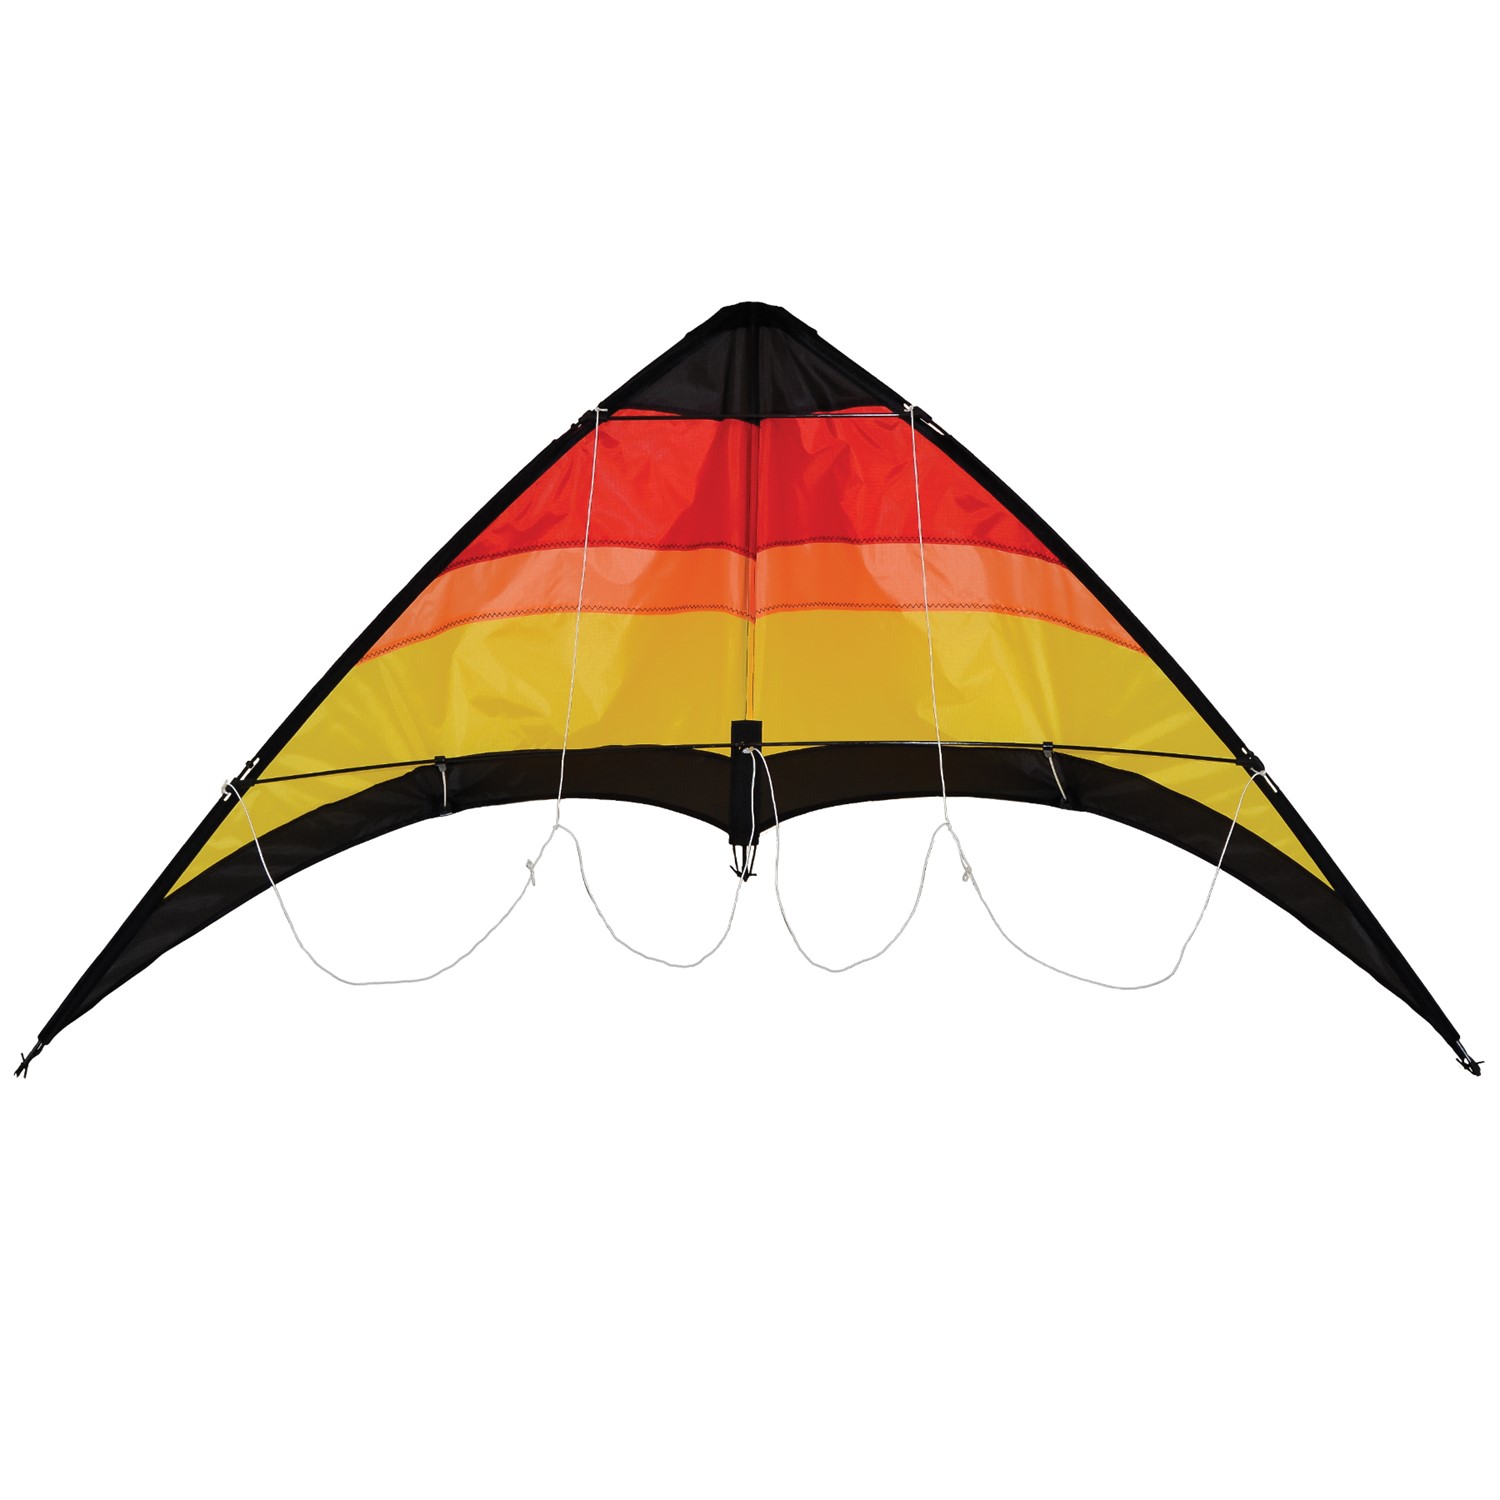 In the Breeze Sunset 55" Sport Kite 3109